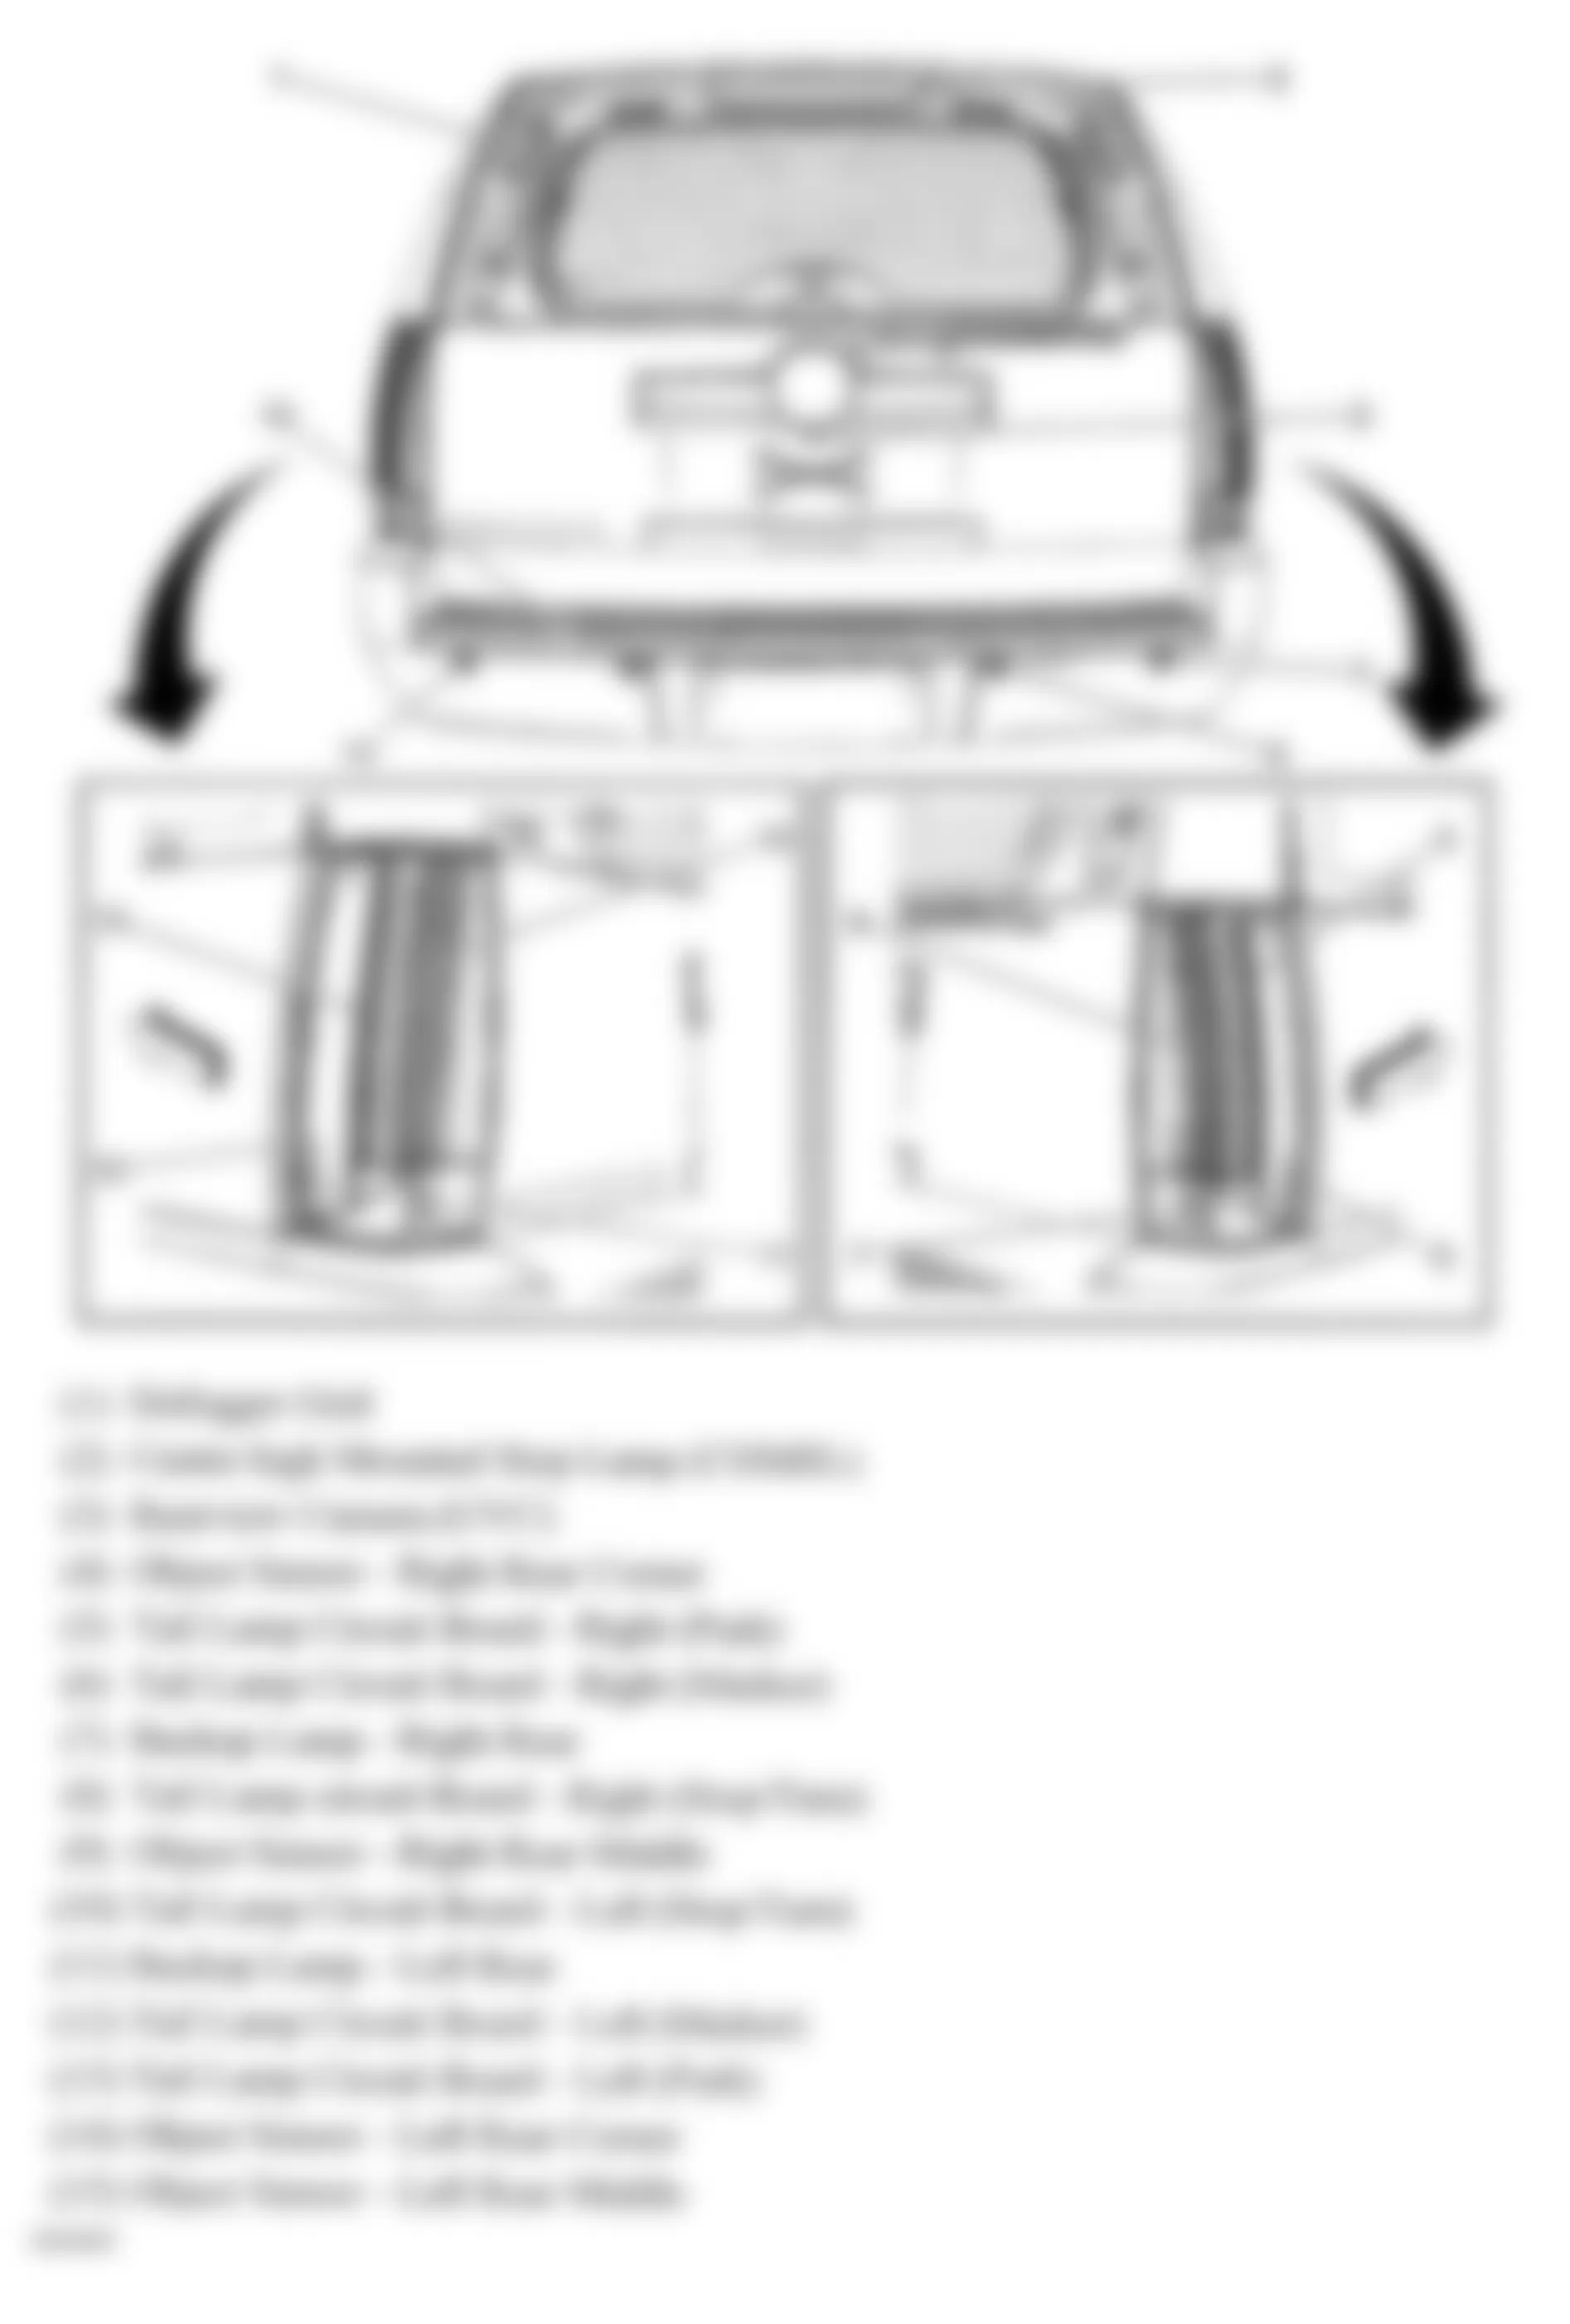 Chevrolet Suburban K1500 2010 - Component Locations -  Rear Of Vehicle (Tahoe & Escalade W/One Piece Liftgate)